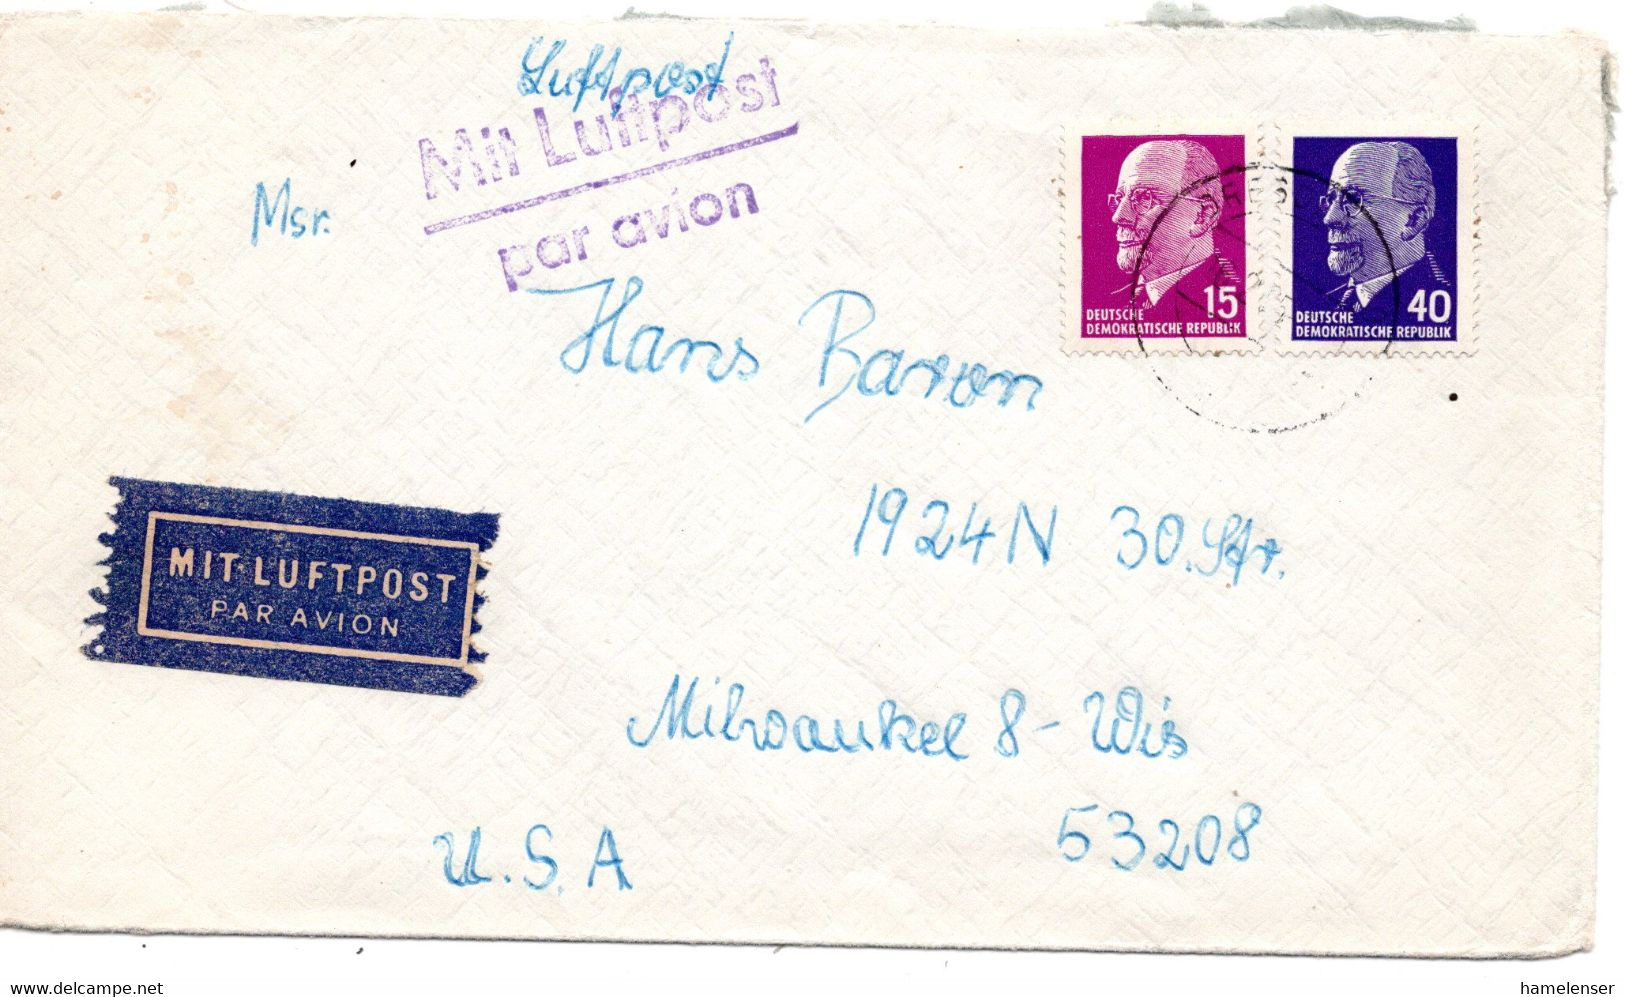 61470 - DDR - 1965 - 40Pfg Ulbricht MiF A LpBf DRESDEN -> Milwaukee, WI (USA) - Covers & Documents